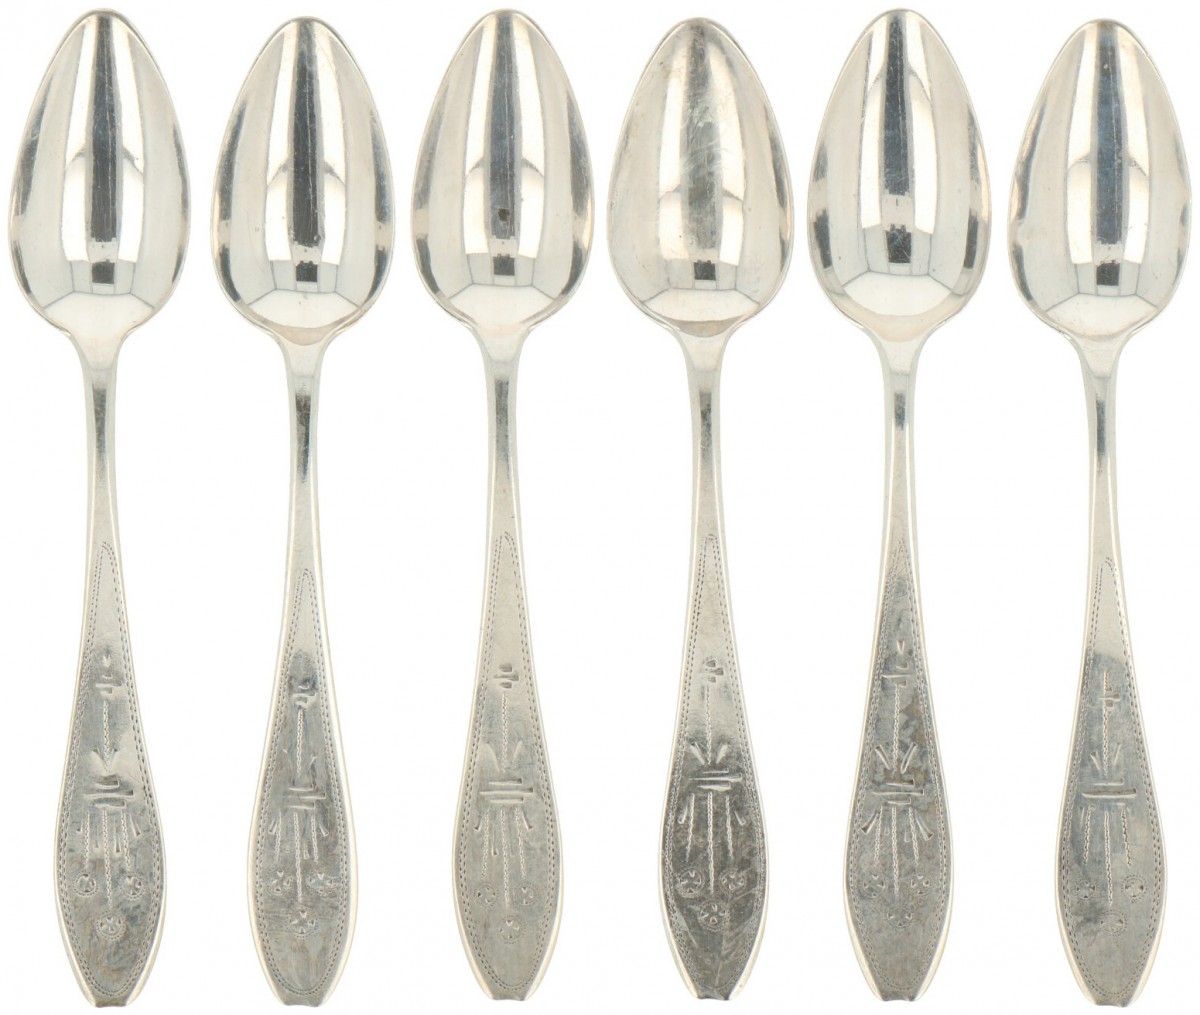 (6) piece set coffeespoons silver. Embellished with beautiful engraved motifs. T&hellip;